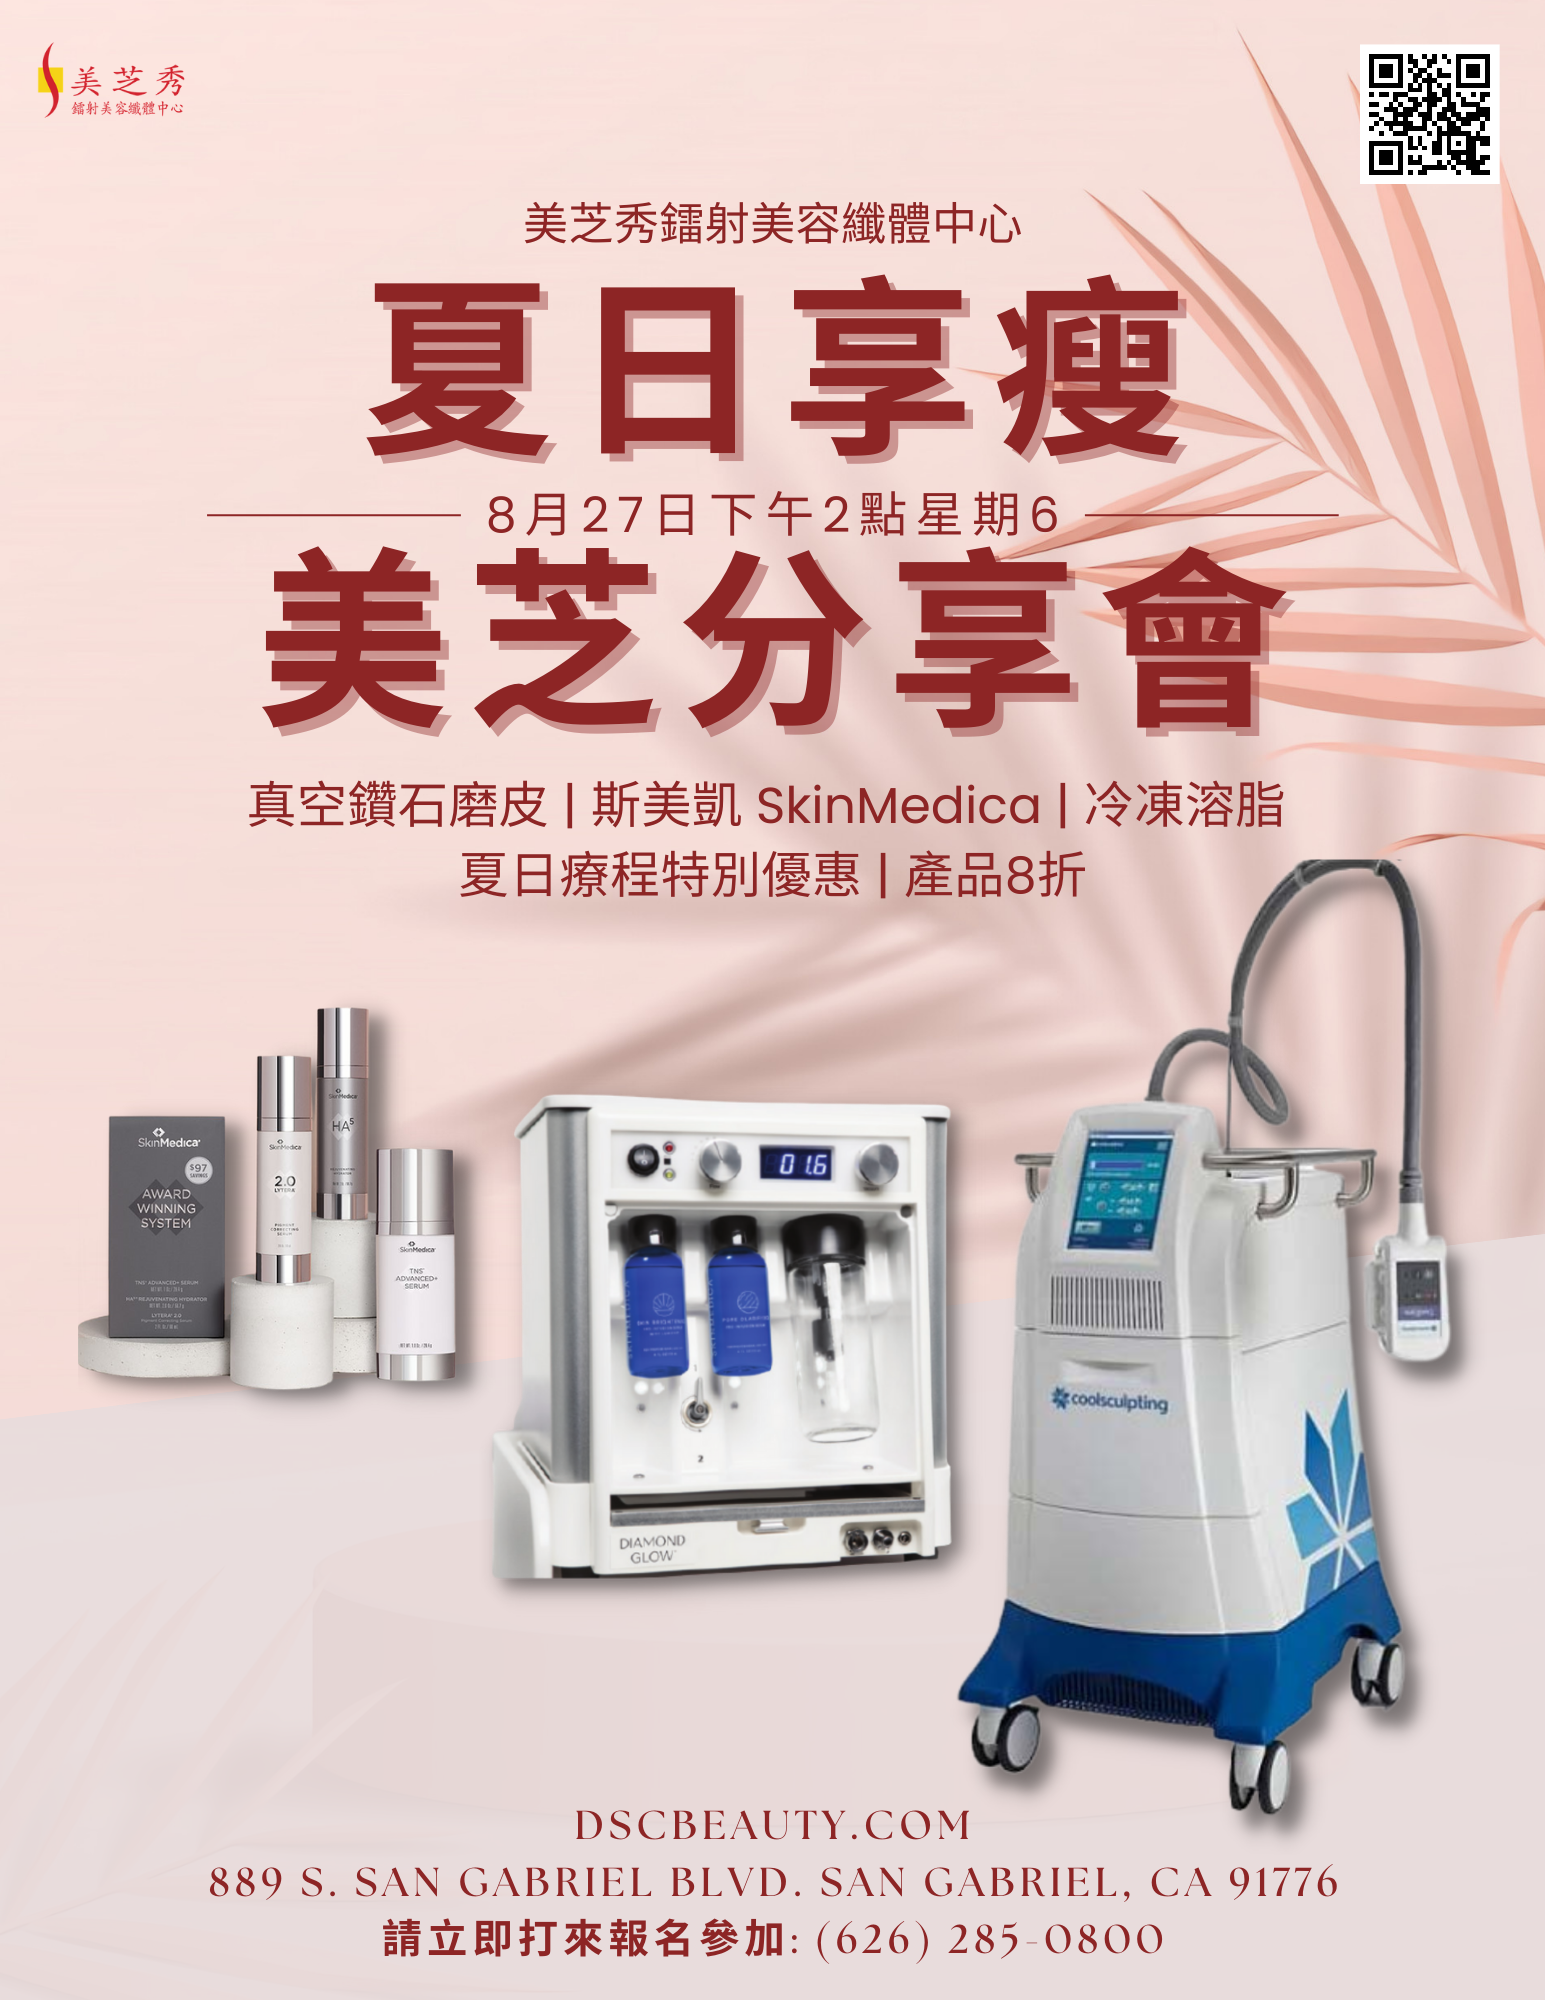 Allergan x DSC August 27th 2022 2PM Saturday Chinese Event Flyer With DiamondGlow Coolsculpting and SkinMedica